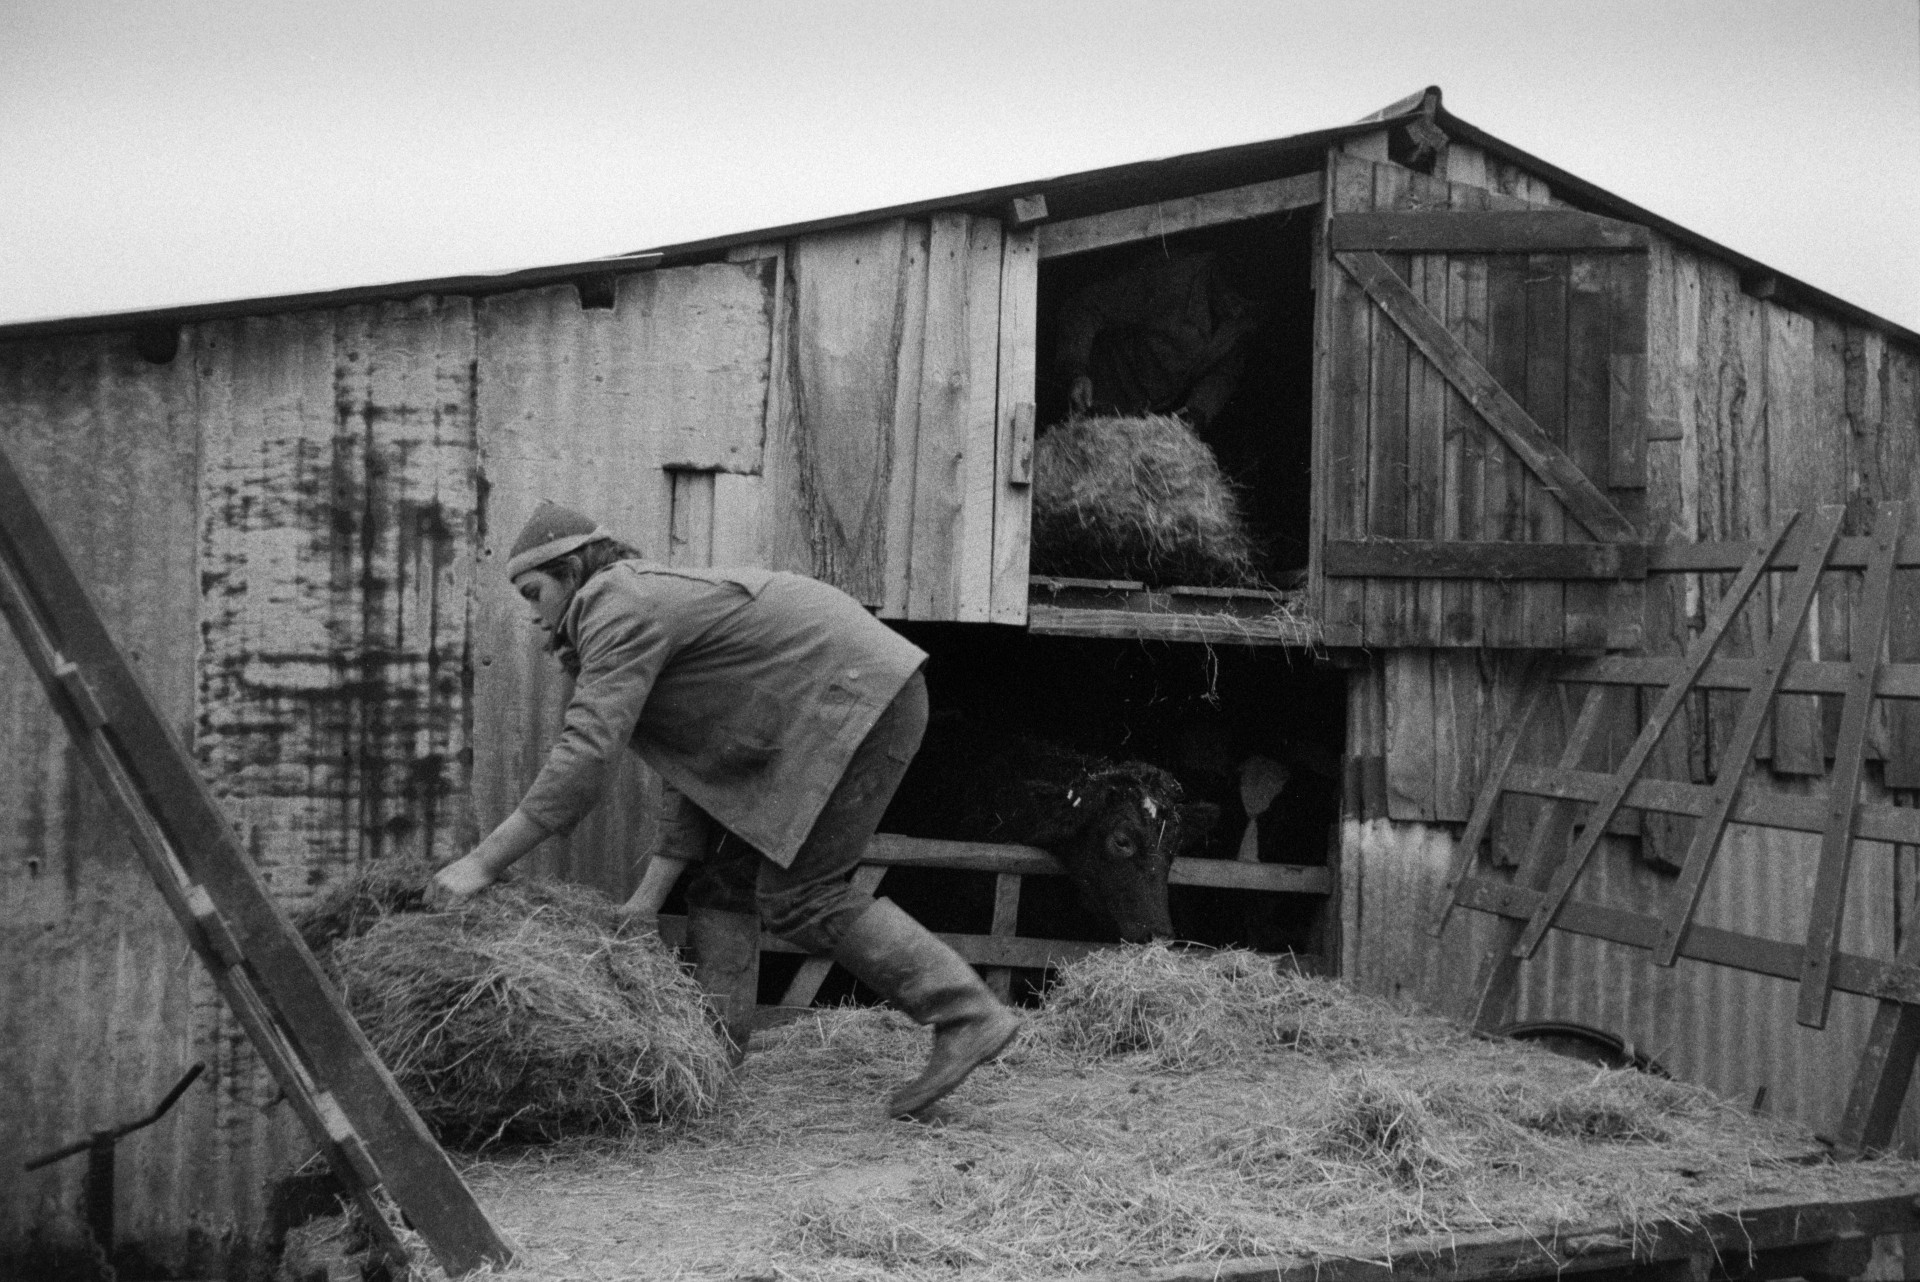 Derek Bright unloading hay bales from a trailer and putting them in a barn tallet at Mill Road Farm, Beaford. A cow is eating some of the hay from the trailer, over the barn gate. The farm was also known as Jeffrys.